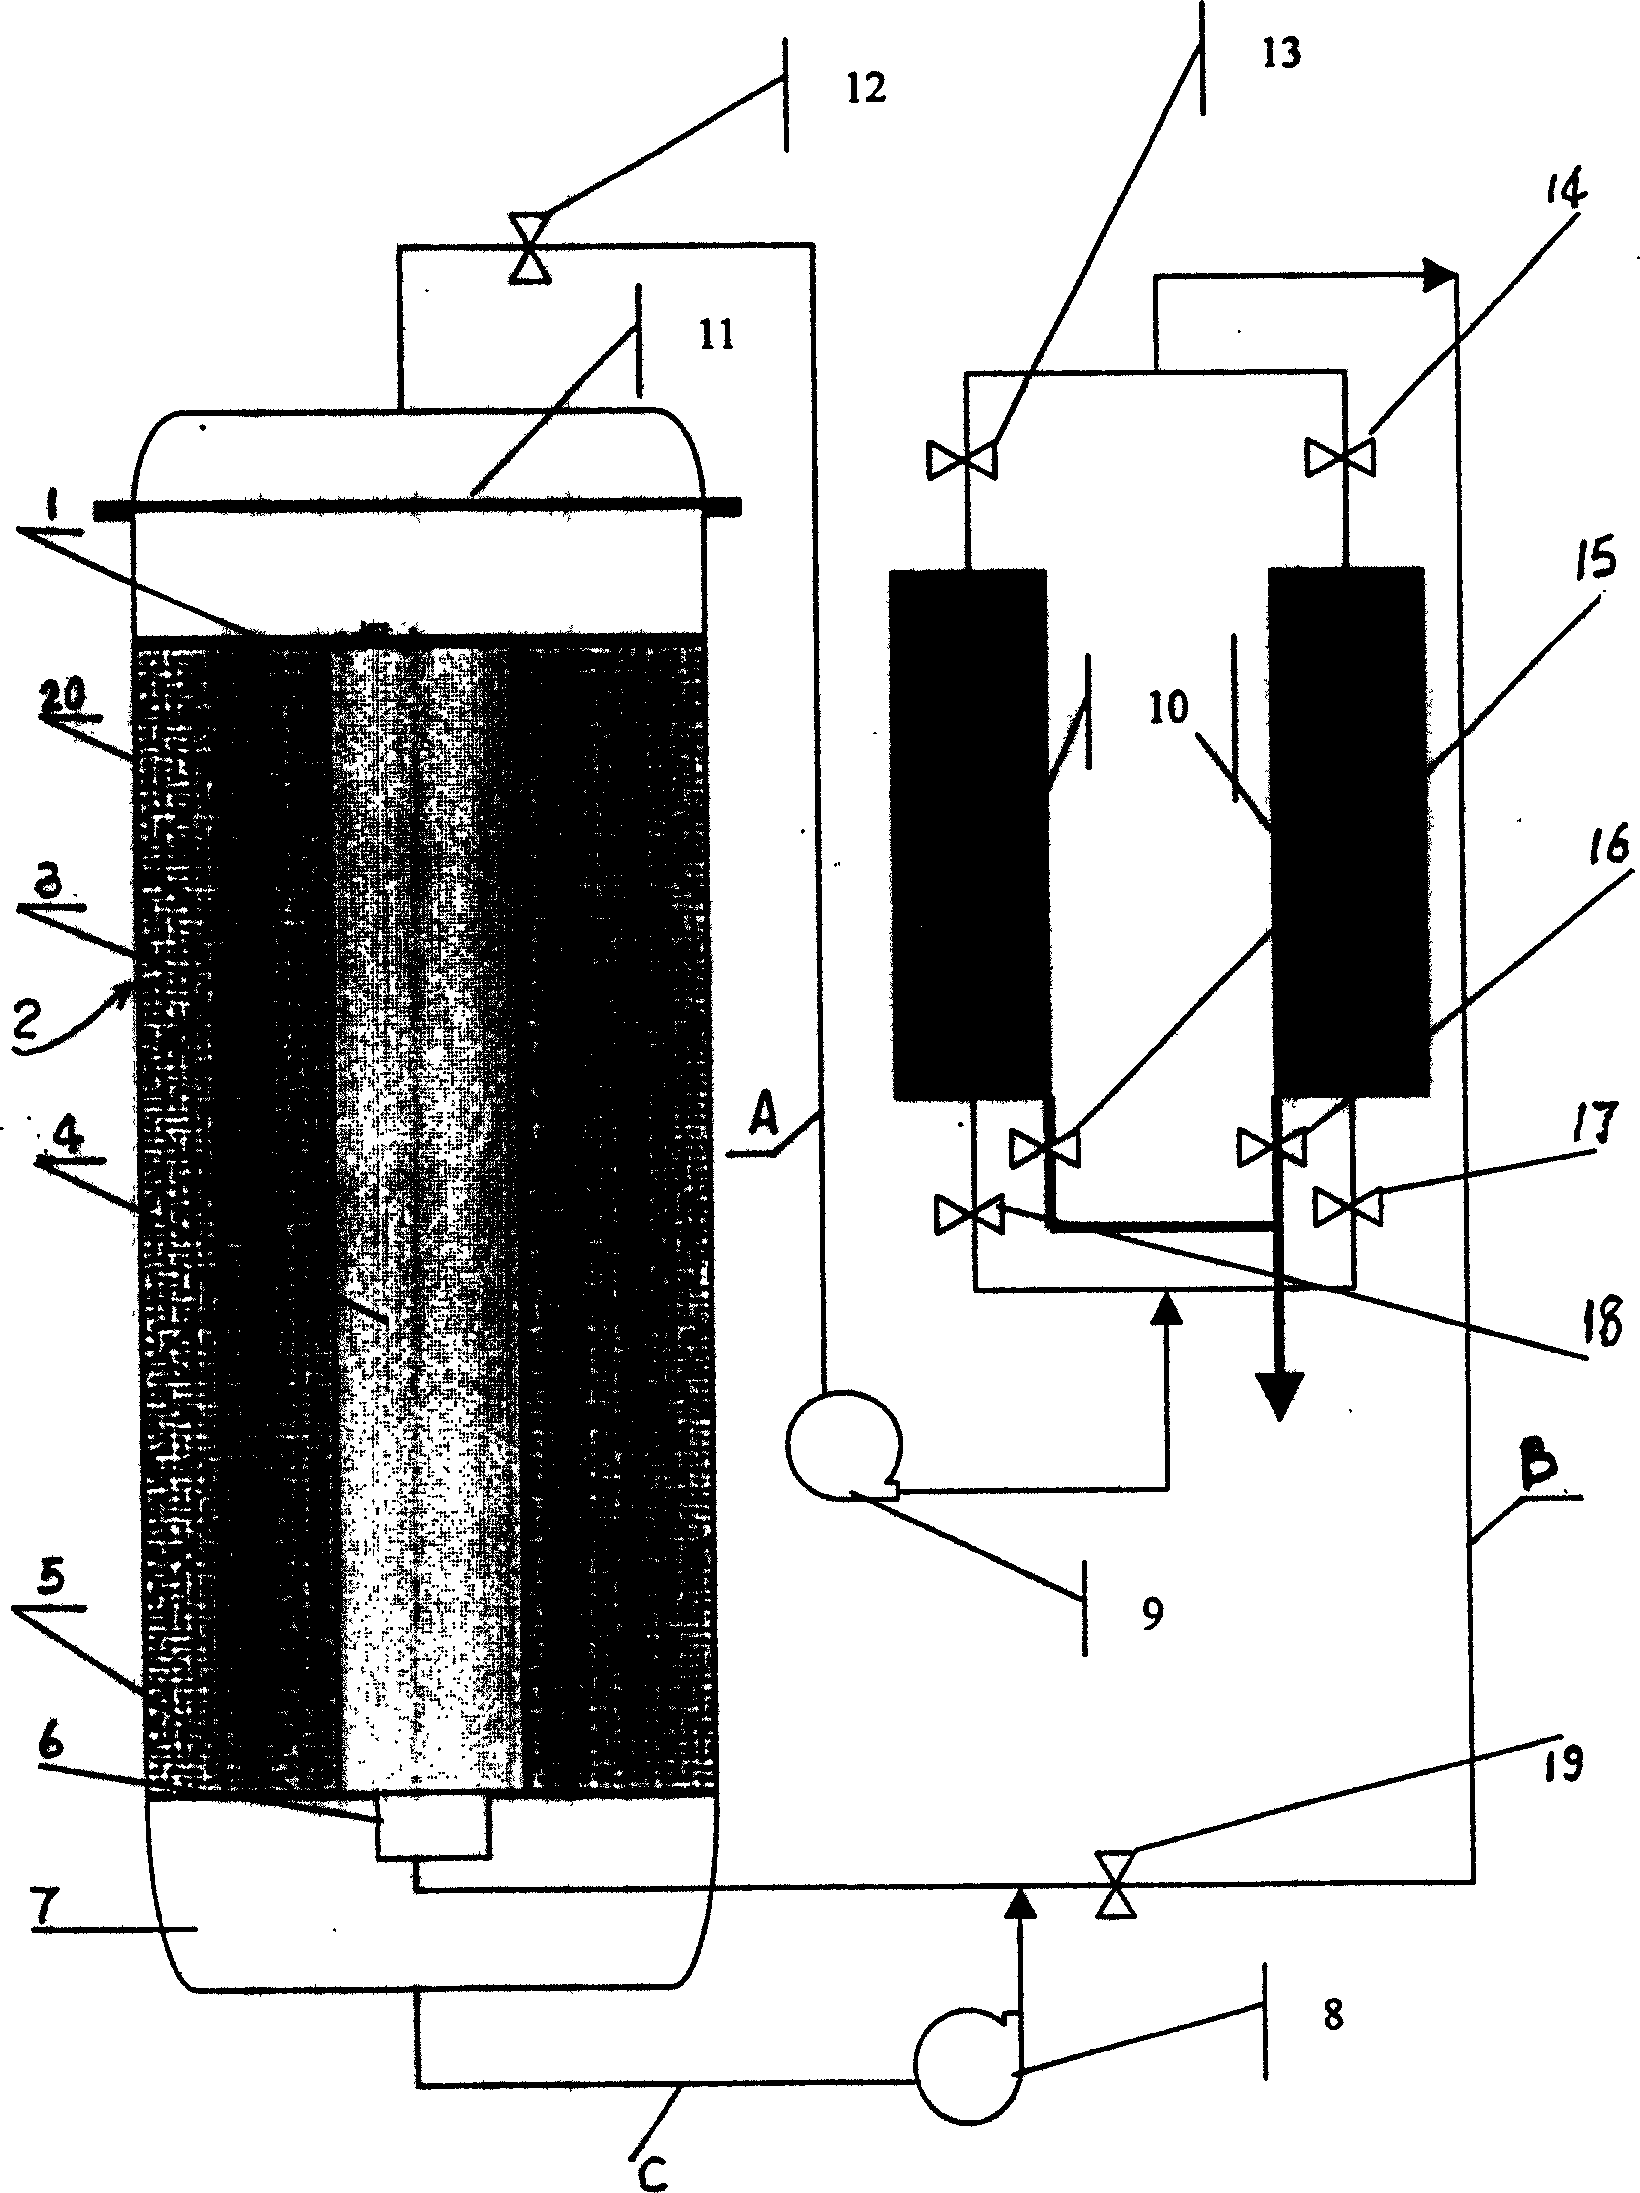 Method of preparing ethanol through cellulose solid phase enzymolysis and liquid fermentation coupling and its installation